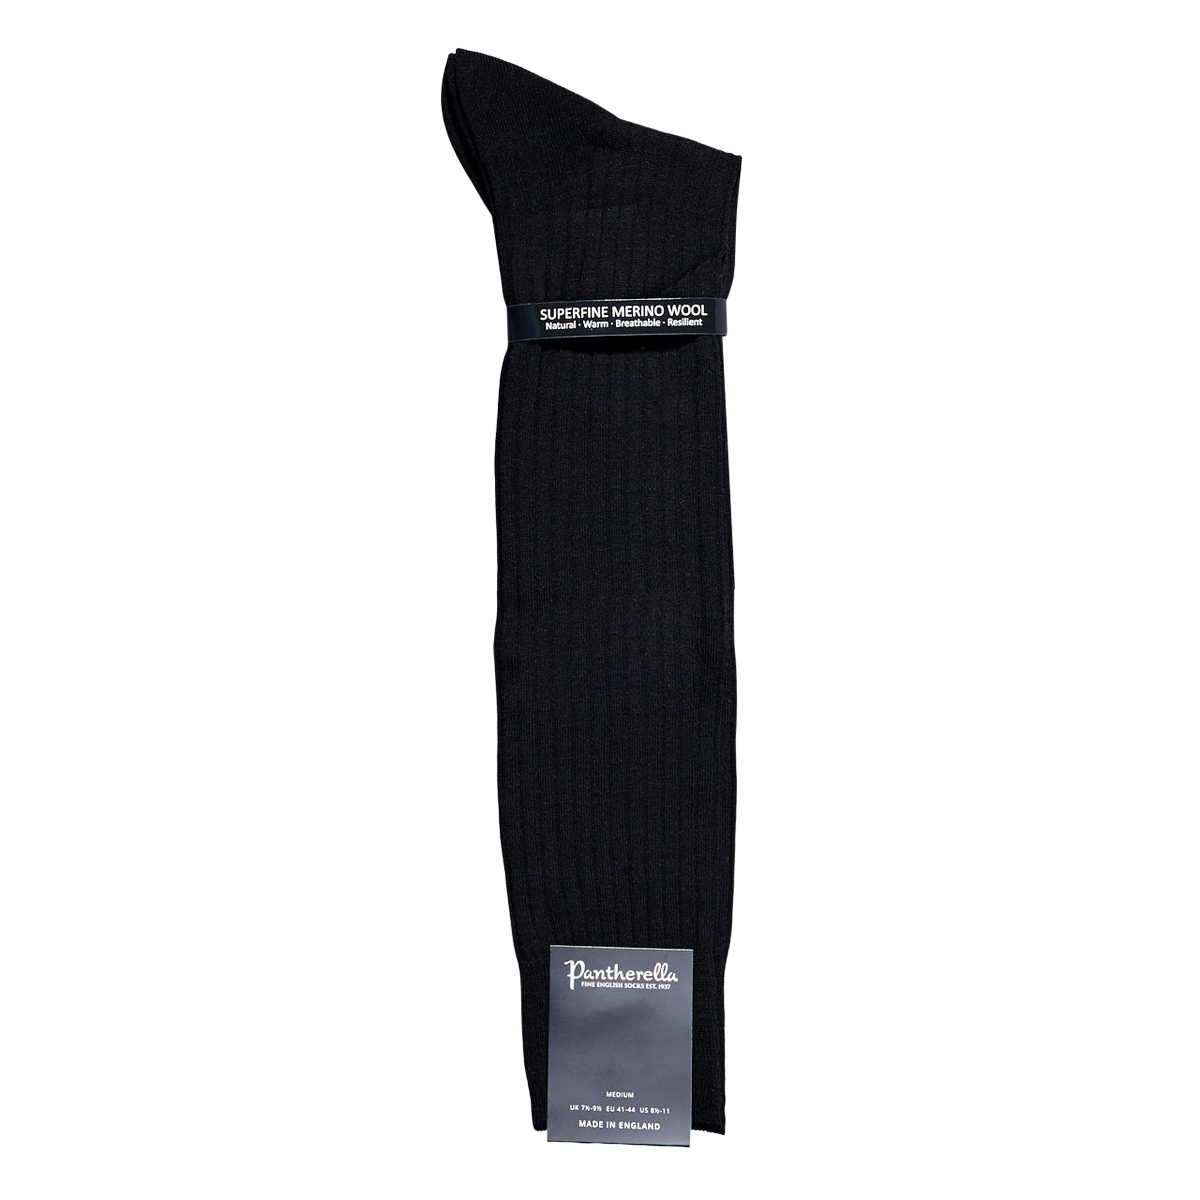 A pair of Pantherella's Black Merino Wool Ribbed Knee Socks, made of merino wool, on a white background.